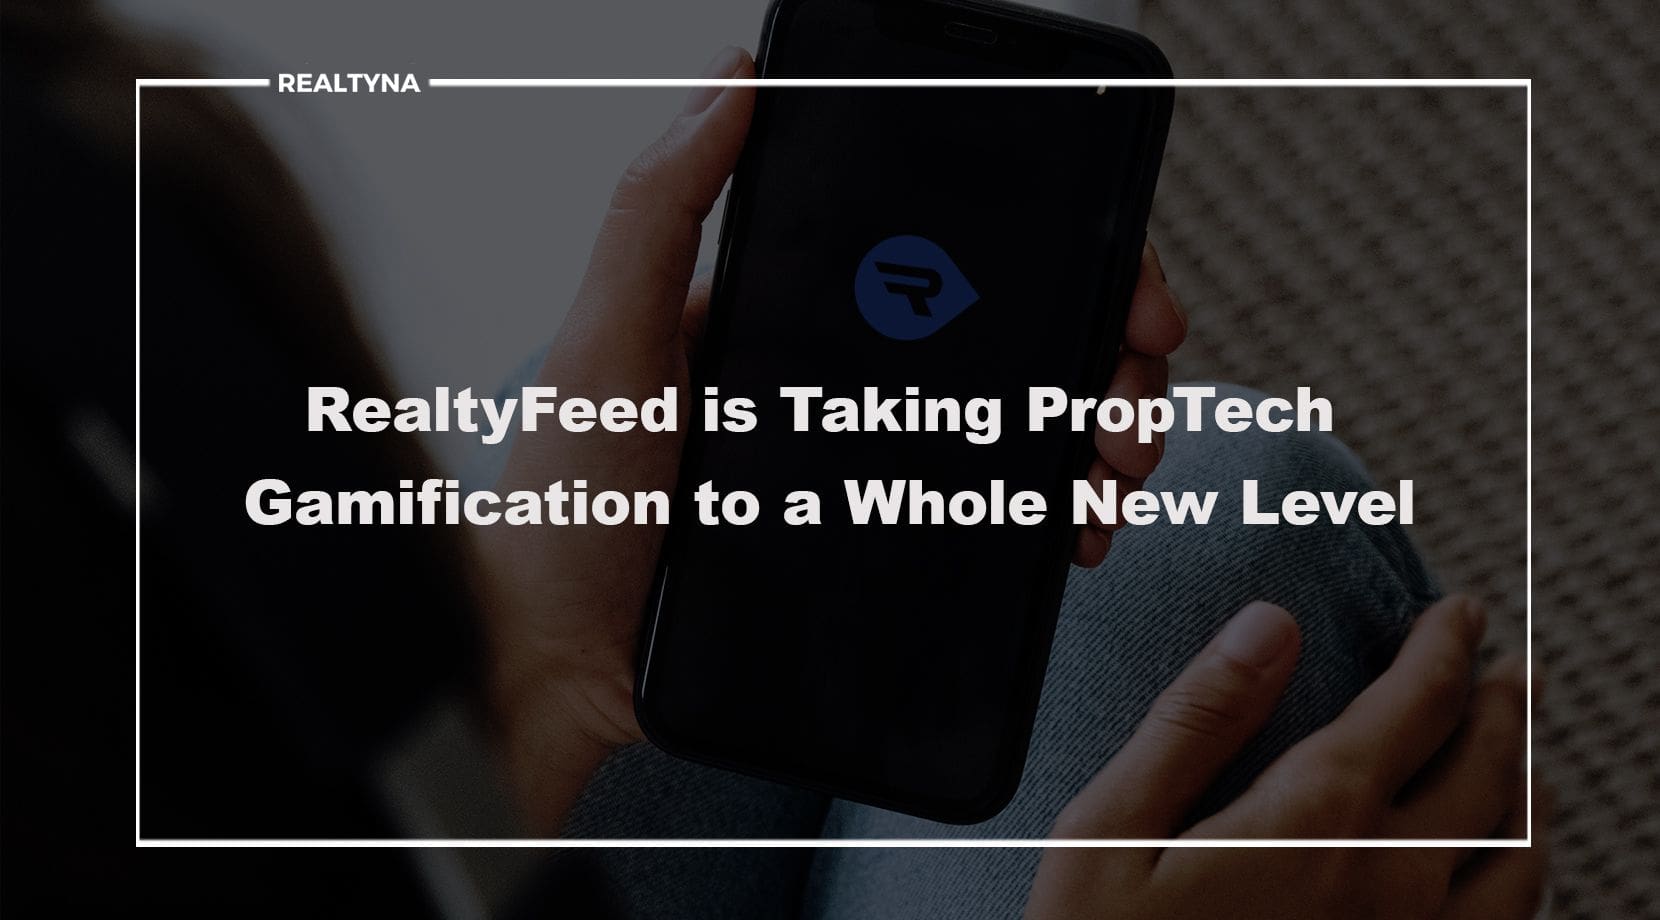 RealtyFeed is Taking PropTech Gamification to a Whole New Level